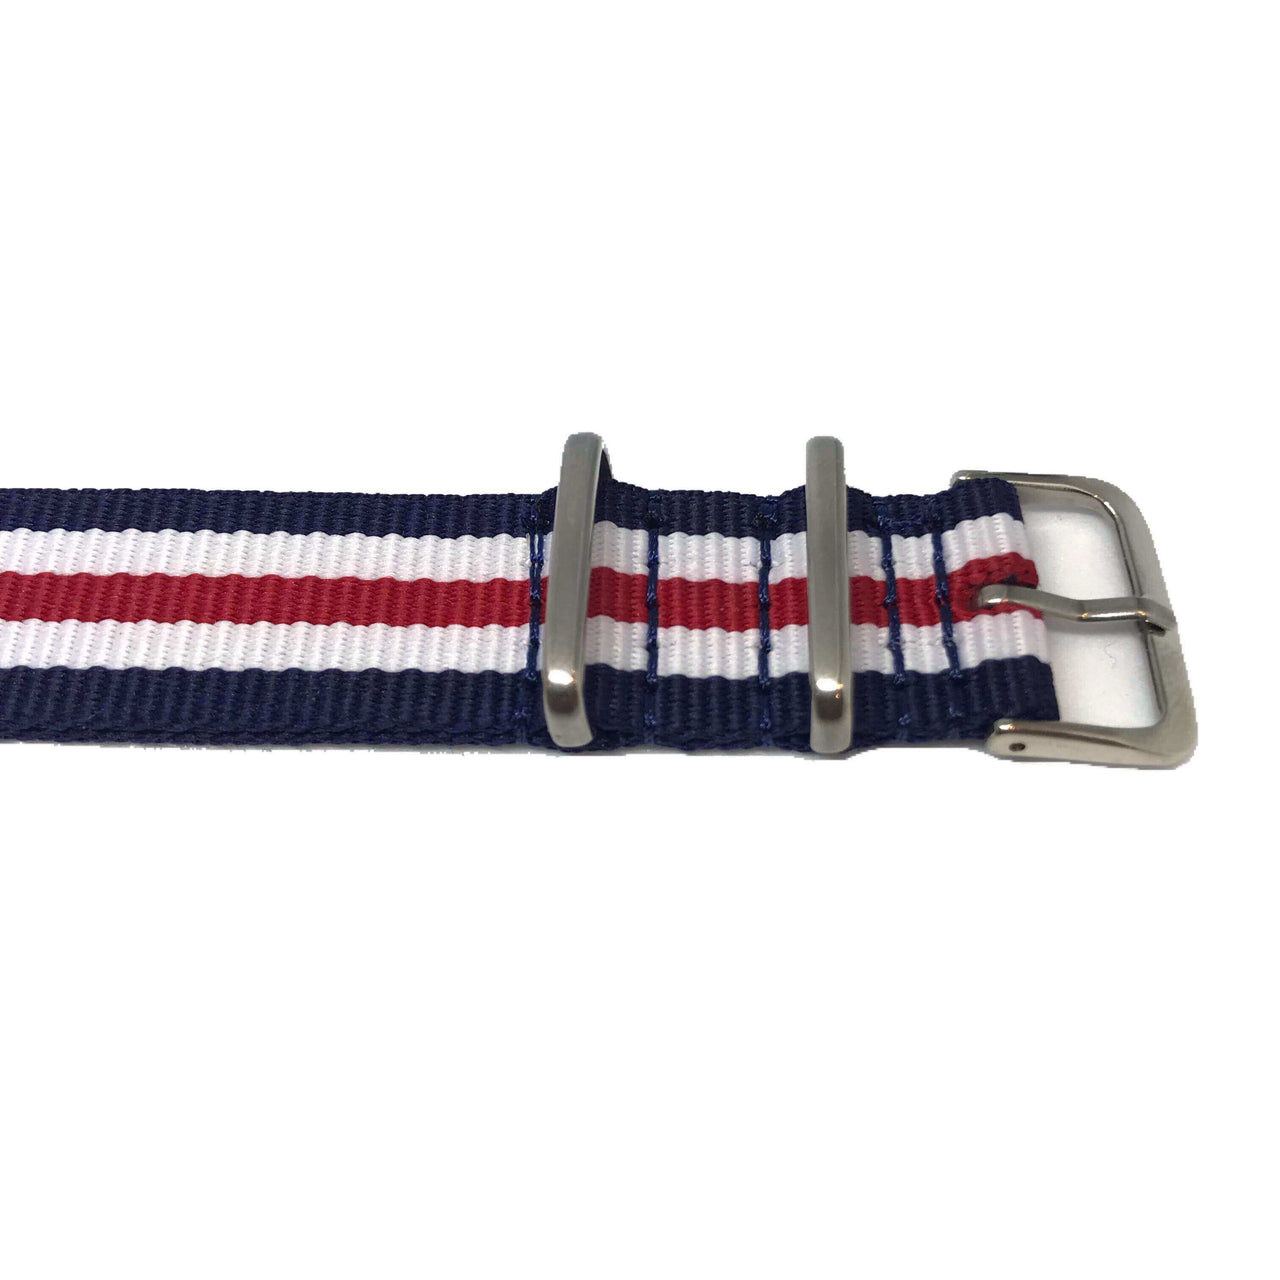 Classic Military Style Strap - Blue, White & Red Stripes